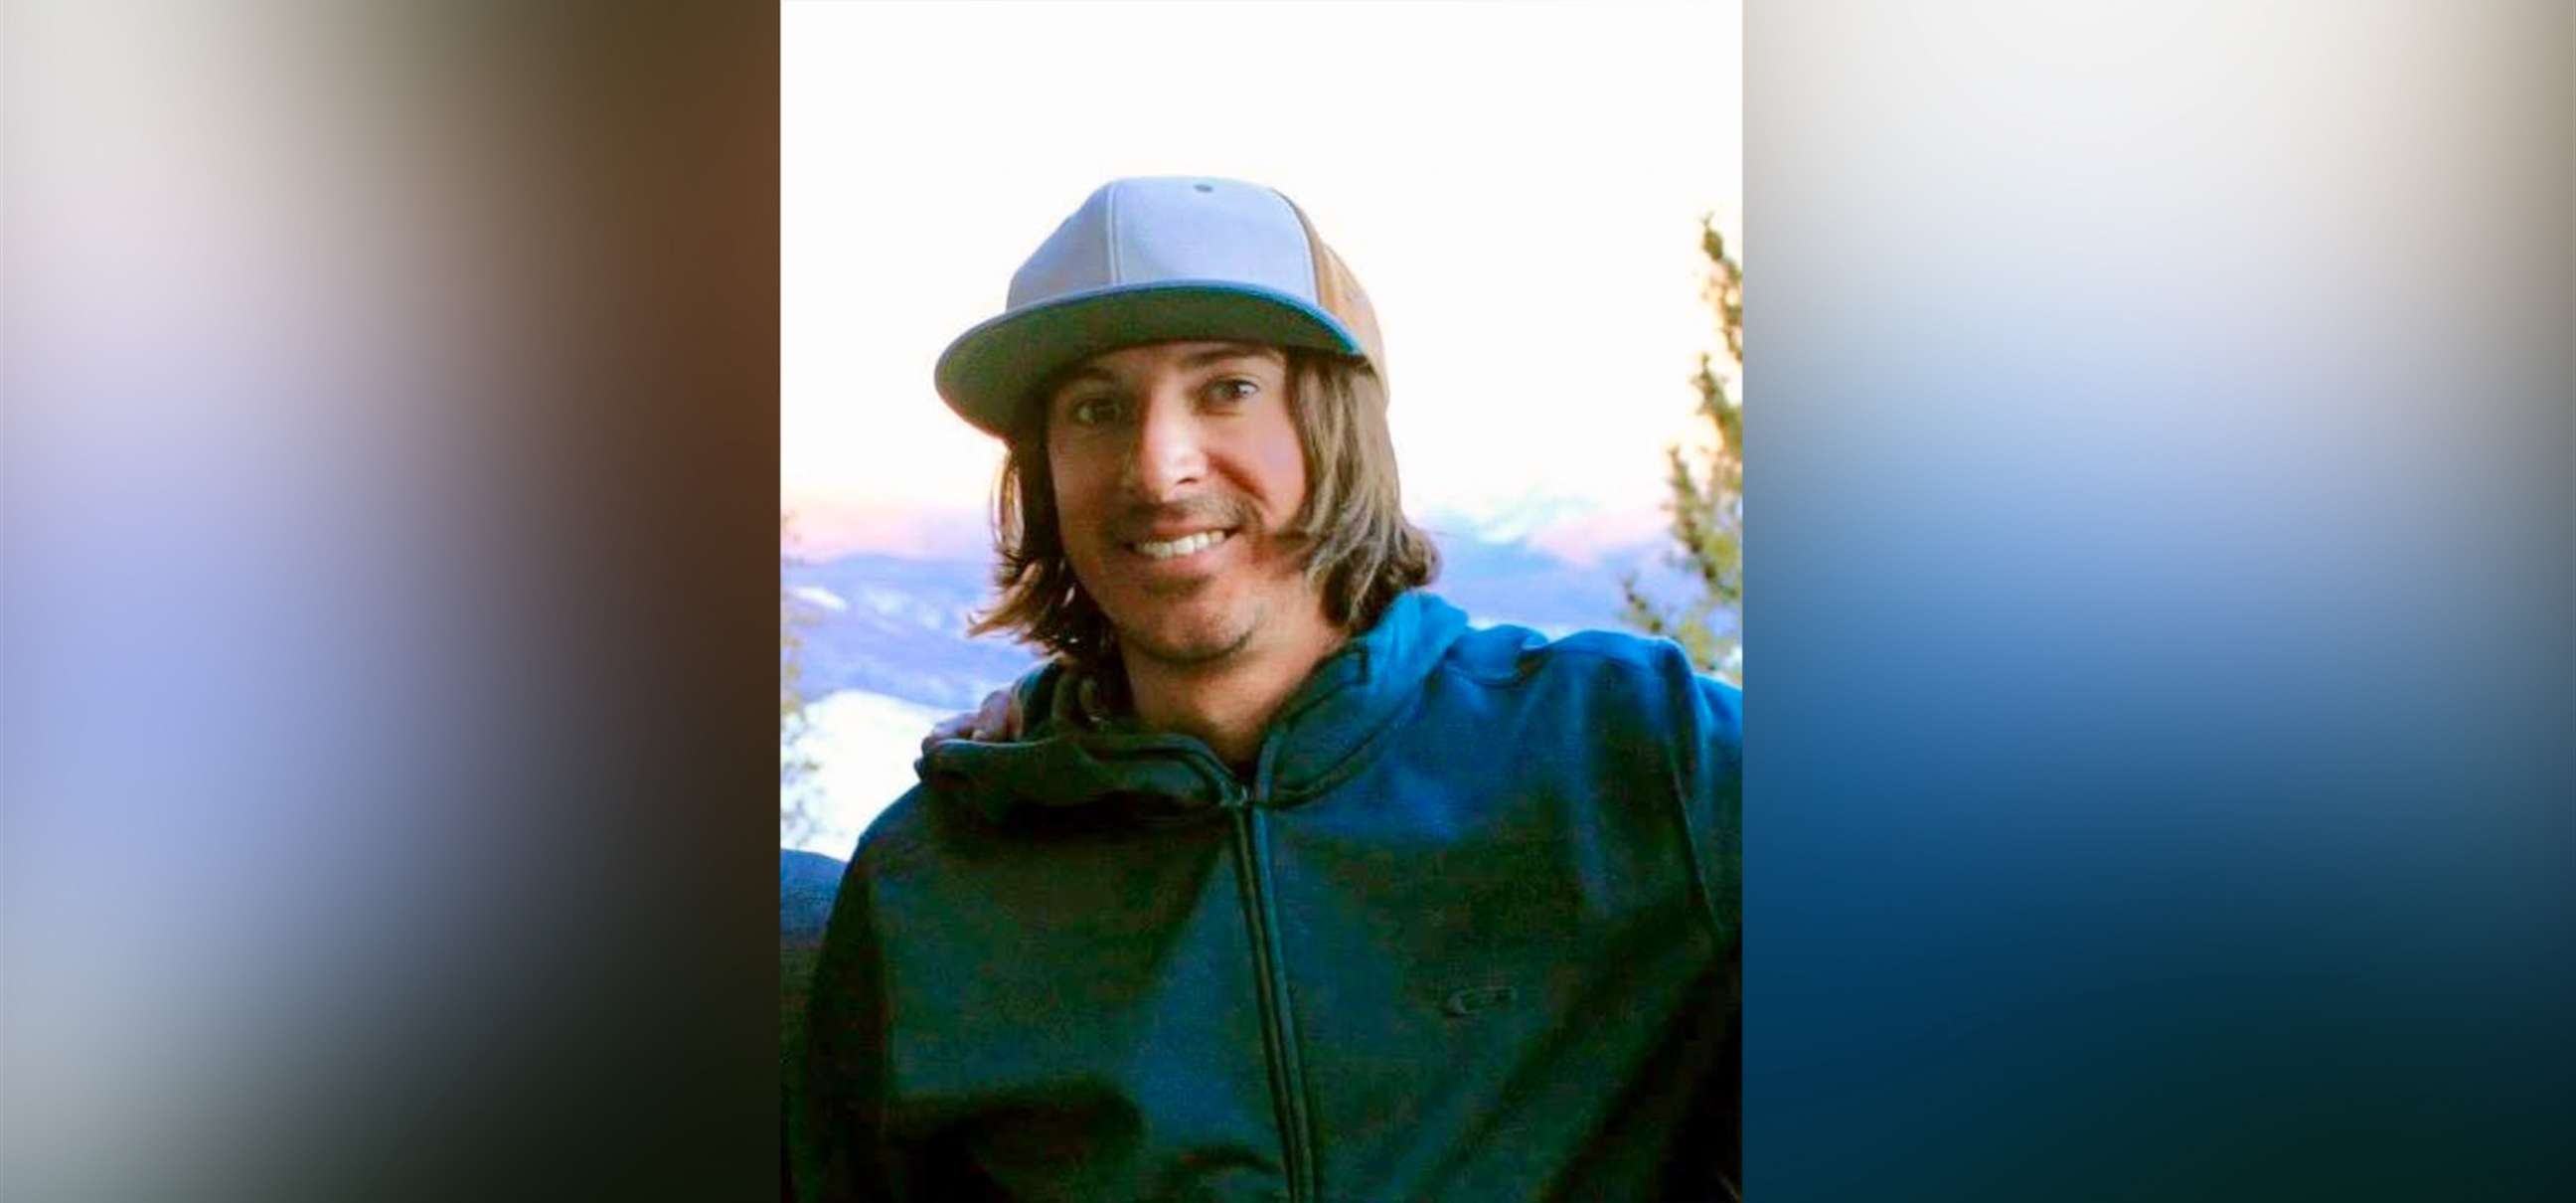 PHOTO: Missing California skier Rory Angelotta is pictured in an undated social media photo released by the Placer County Sheriff's Office.